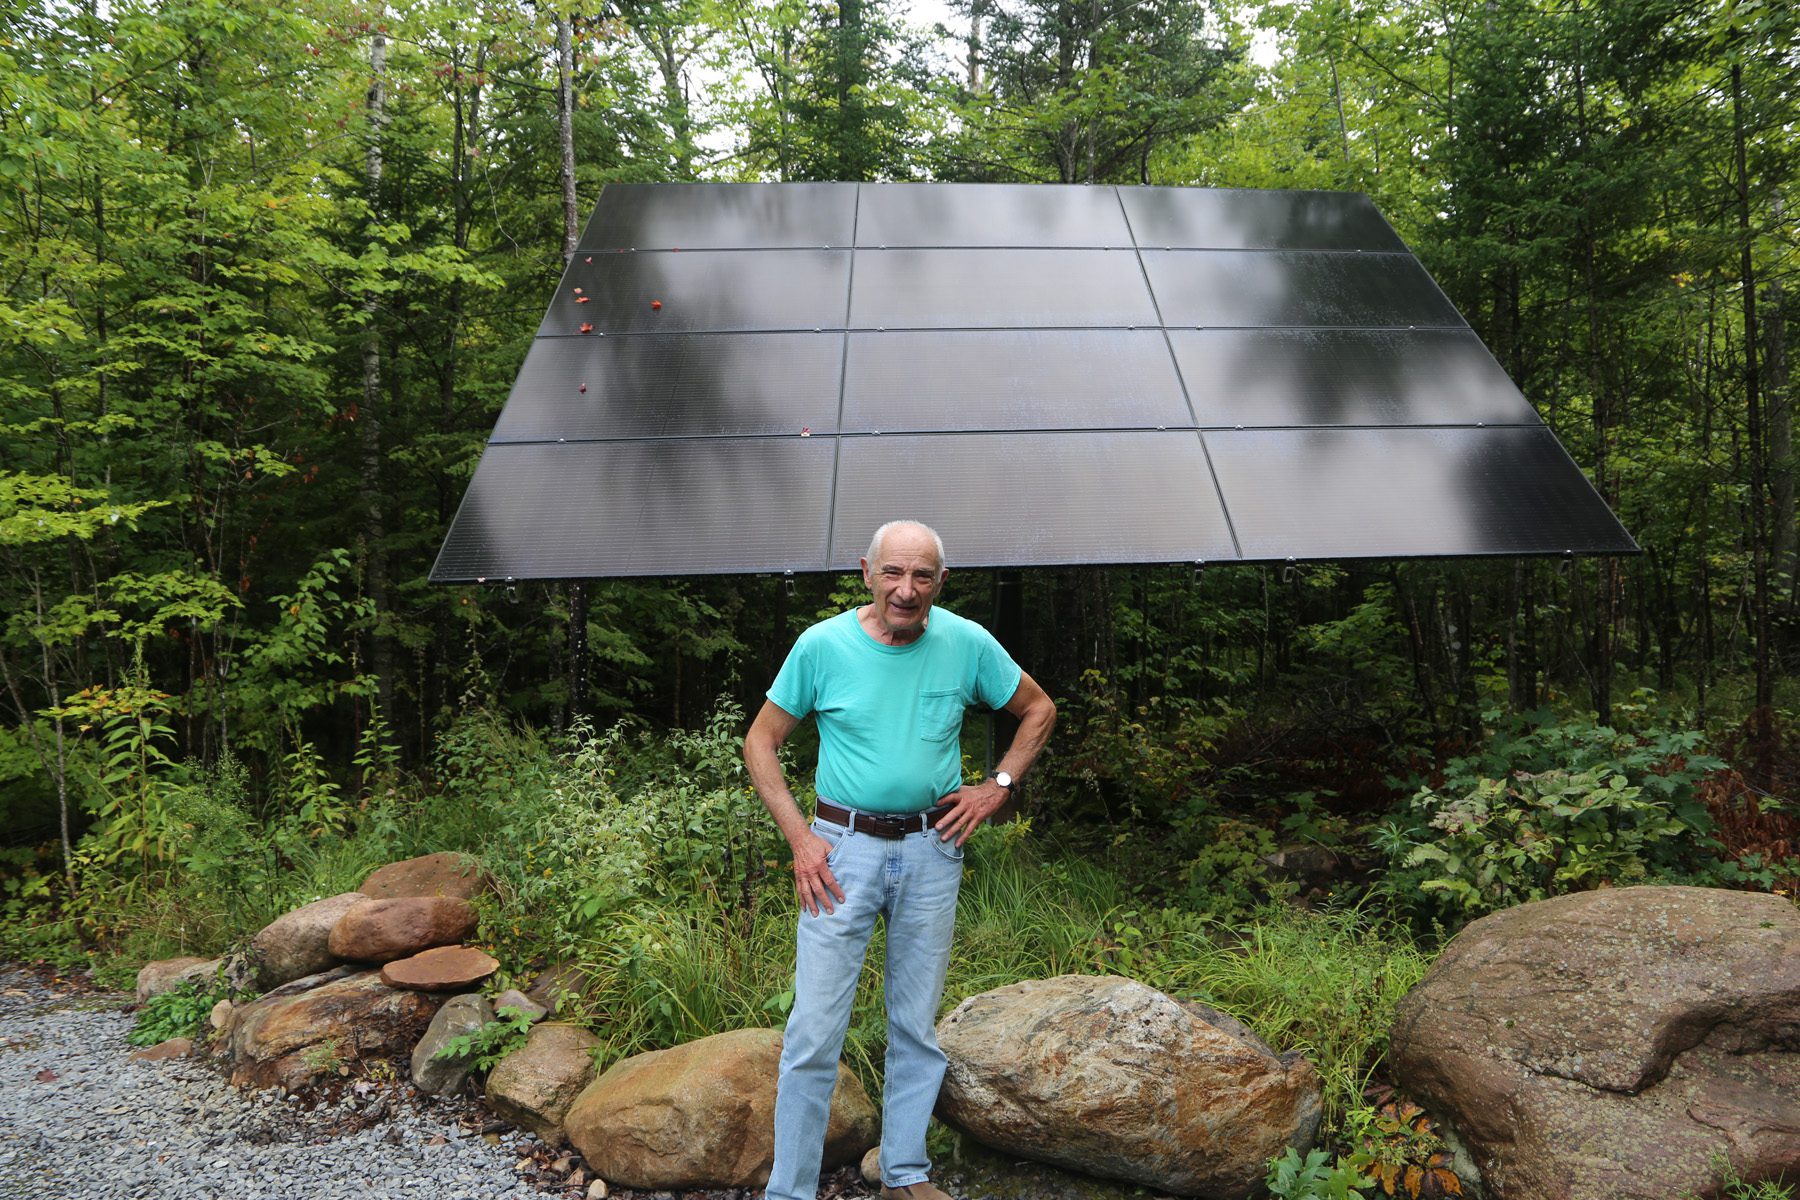 Jim Visconti stands in front of his home's solar panels.